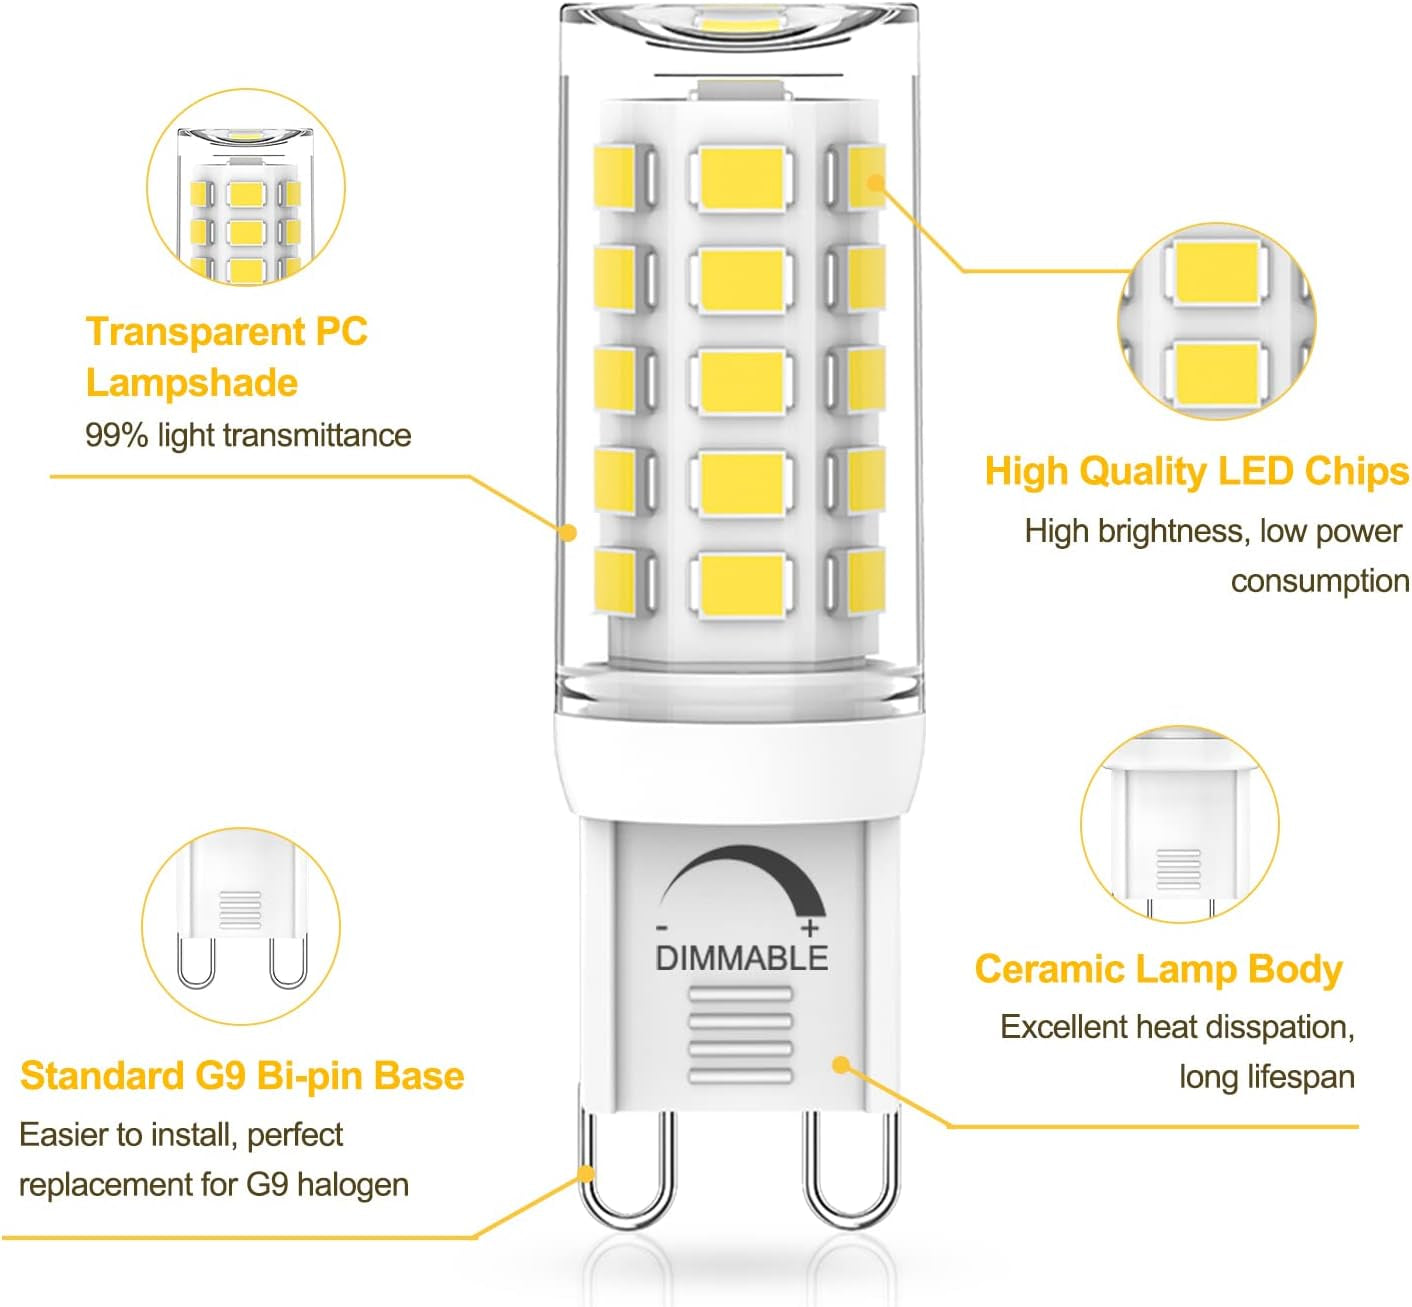 G9 LED Bulb Dimmable, 4W, 40W Halogen Equivalent, 5000K Daylight White, AC 120V G9 Bi Pin Base Light Bulbs, 380LM, No Flicker, 360° Beam Angle, Pack of 6